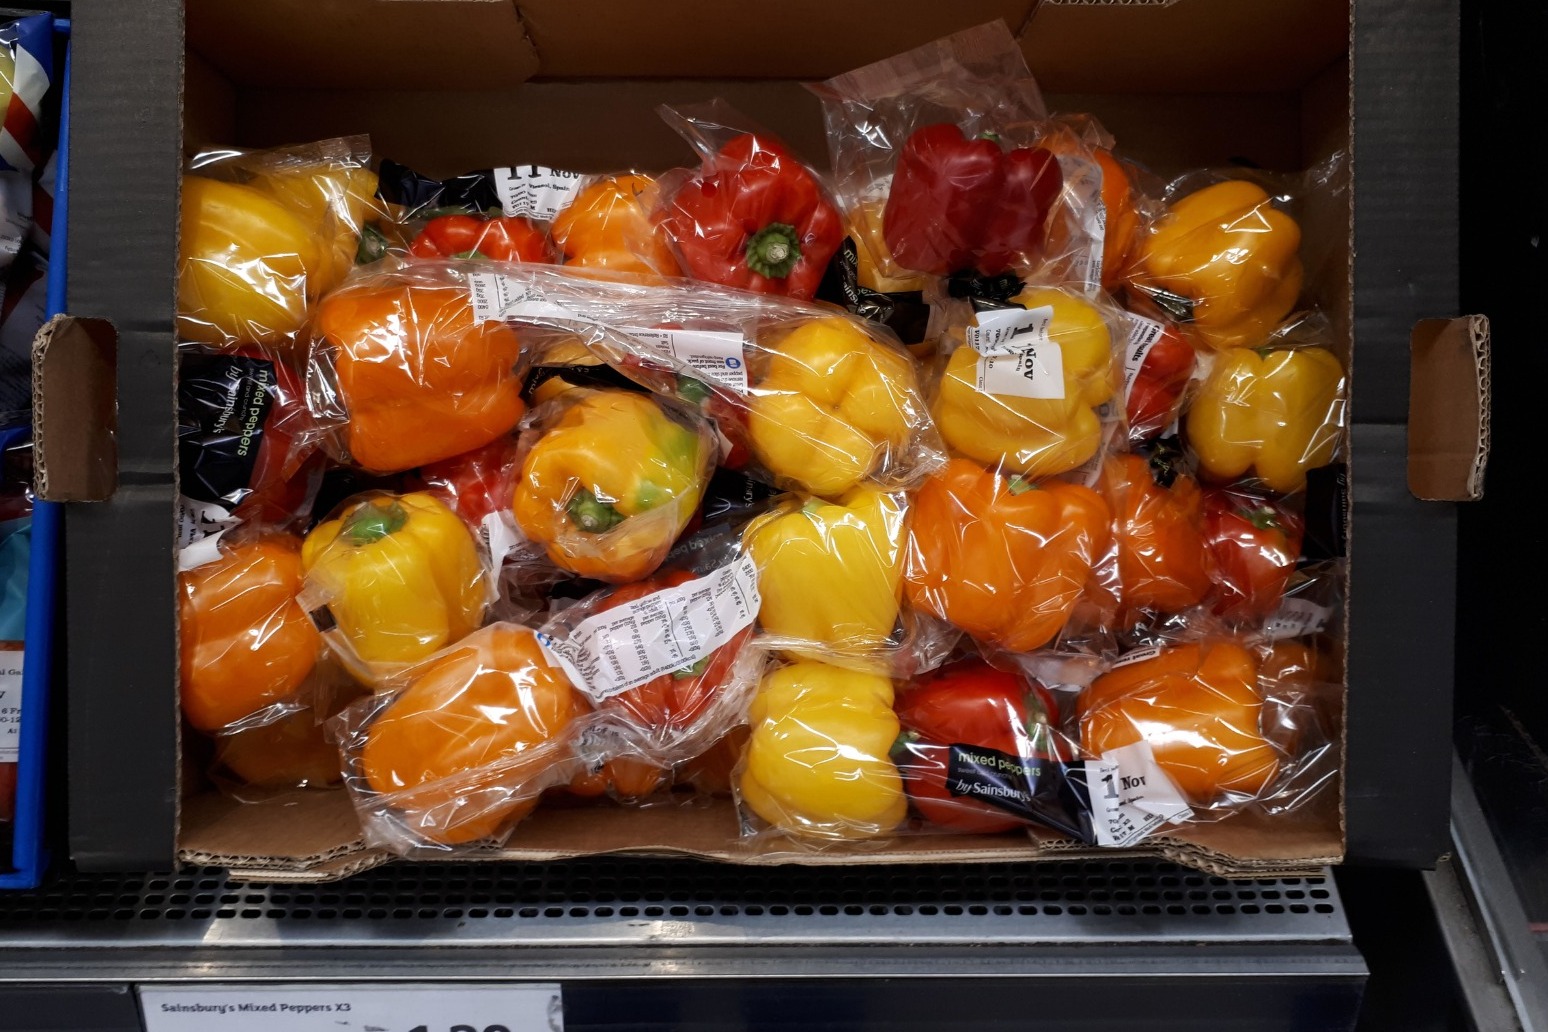 Shortage of tomatoes widening to more products and likely to last ‘weeks’ 